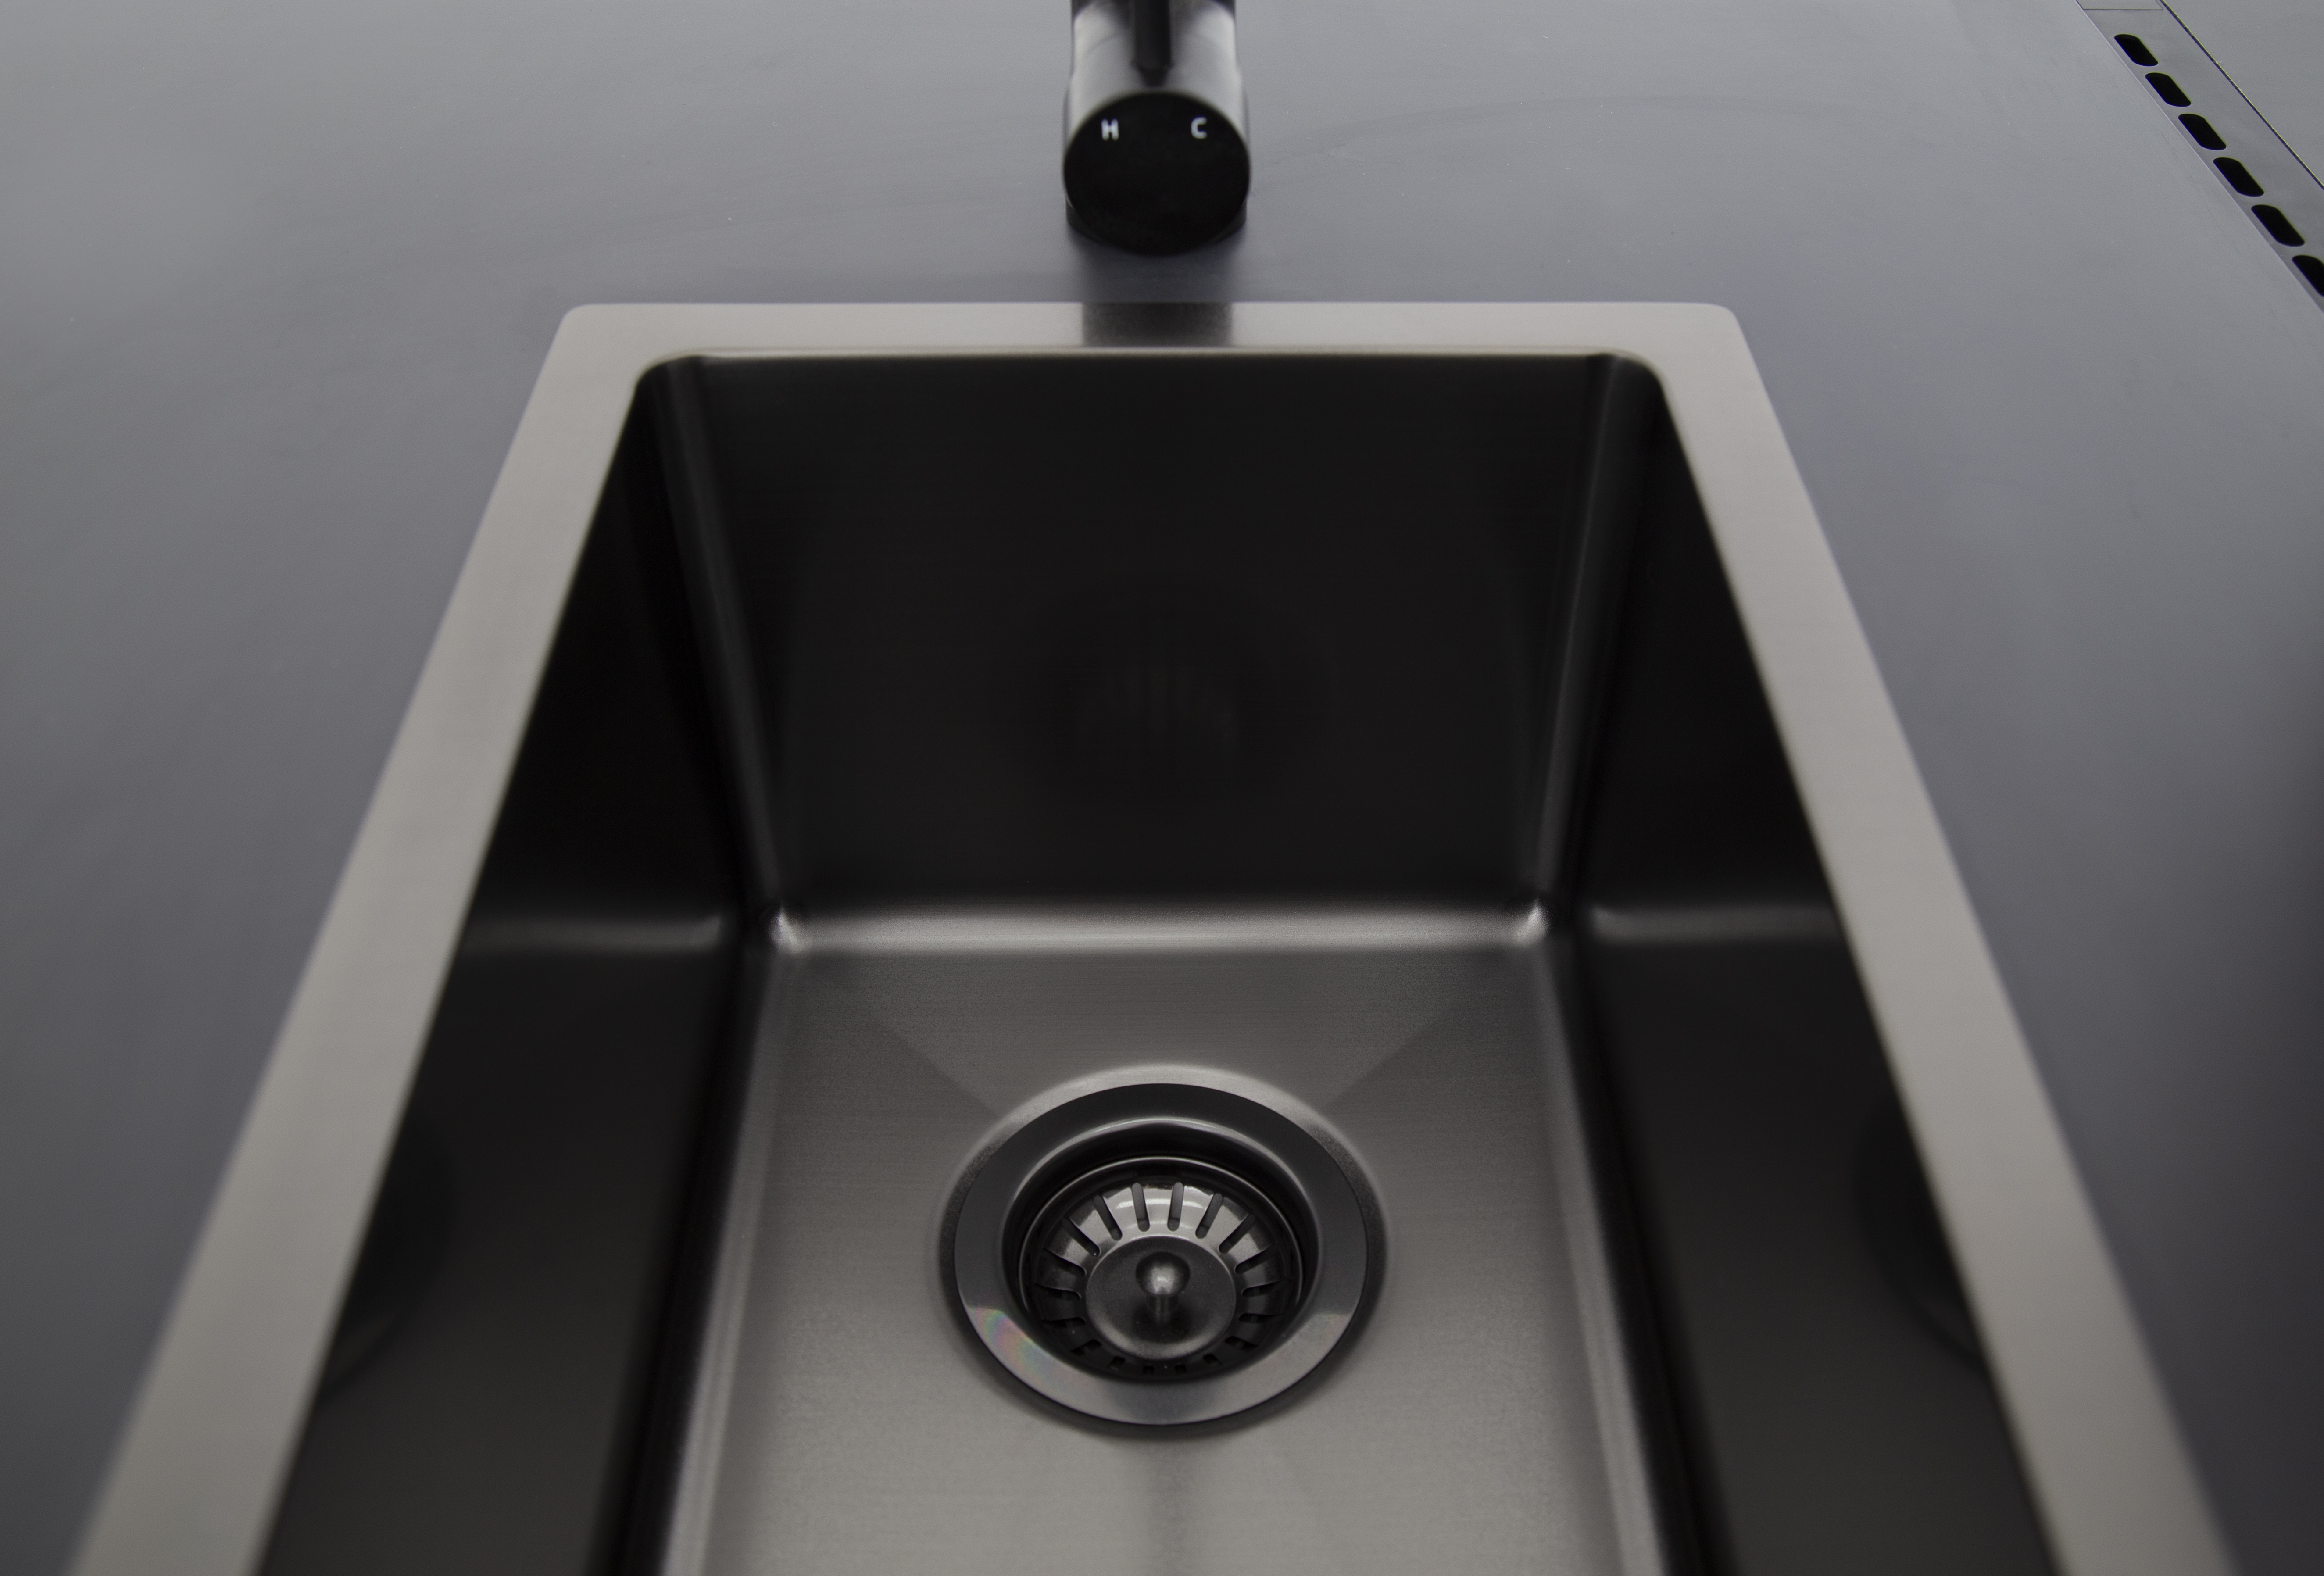 Cabinex Sink and Tap Detail 21.jpg